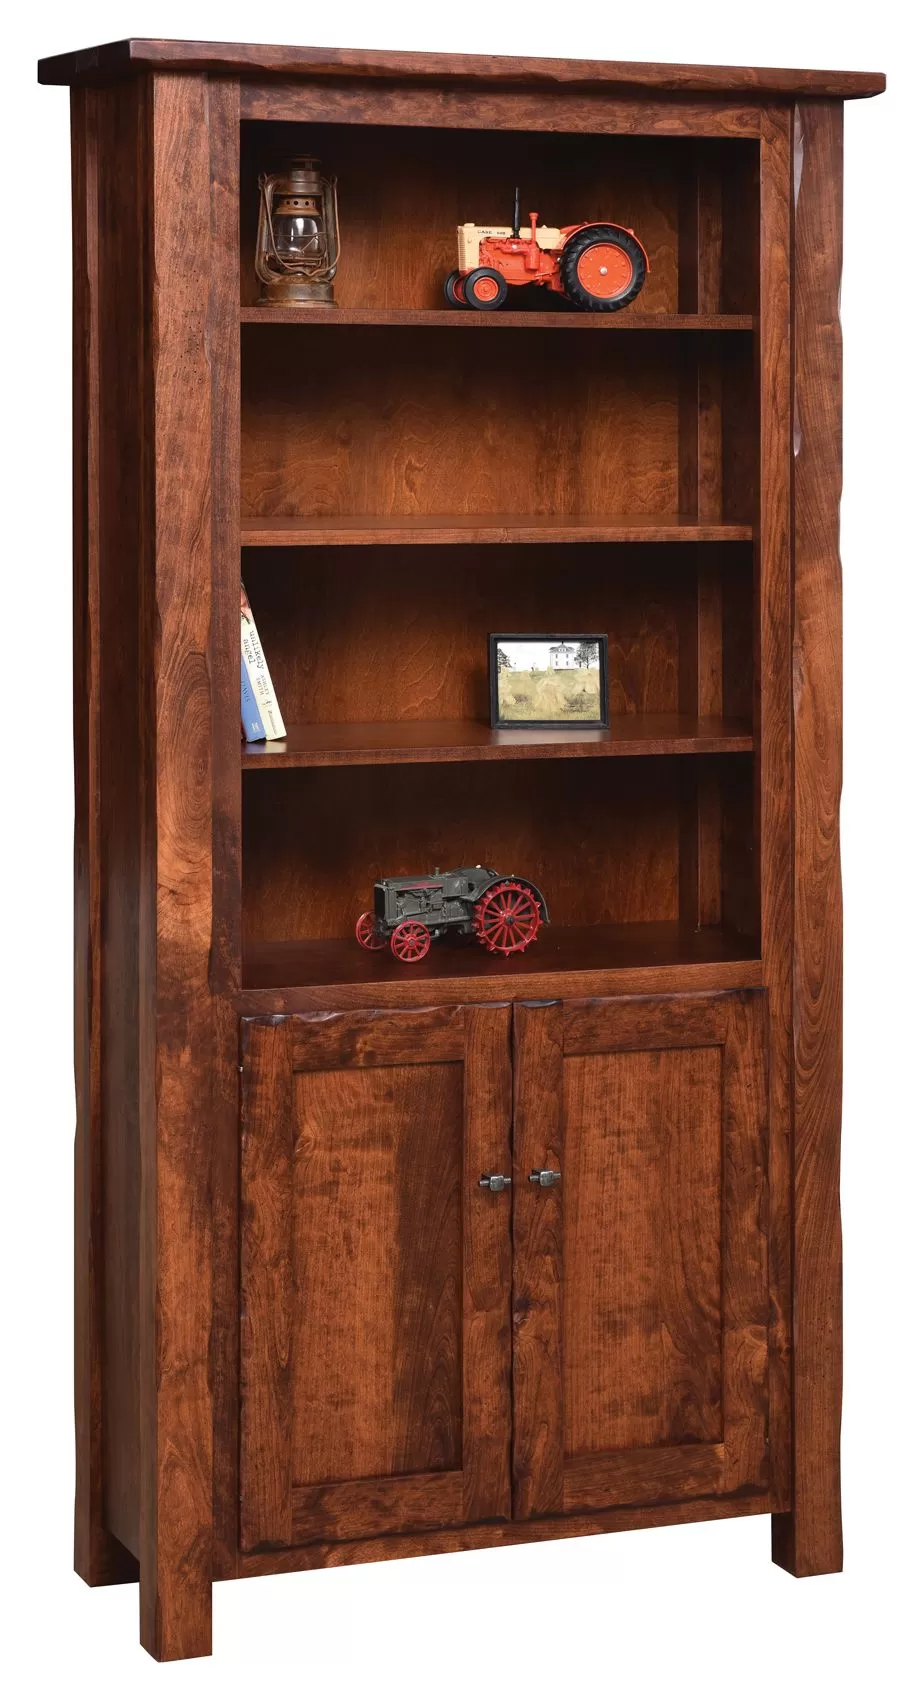 36" Hand Hewn Bookcase with Doors